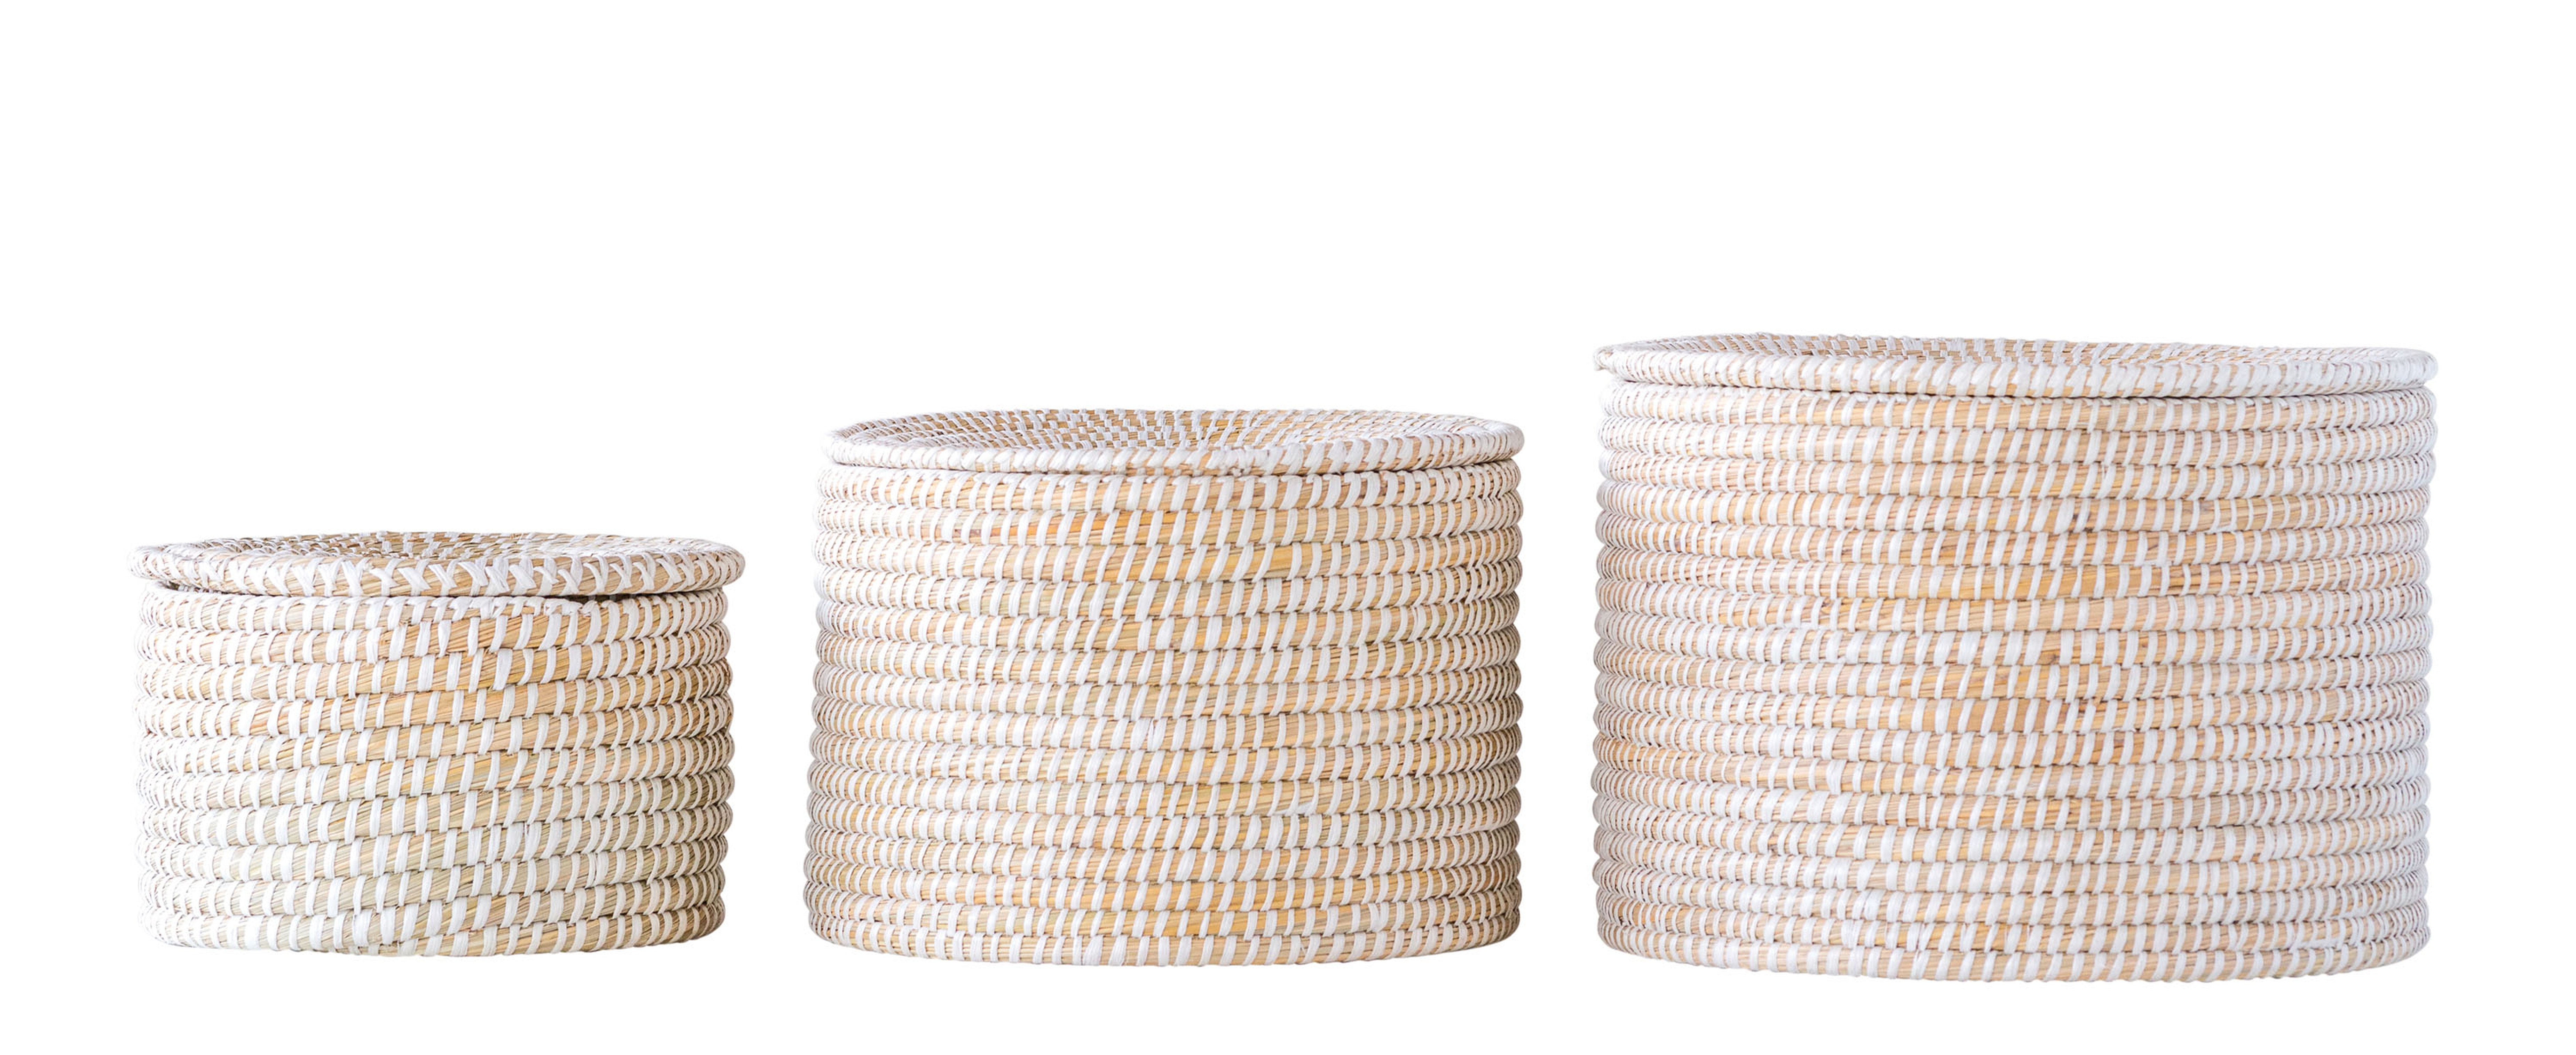 Whitewashed Woven Seagrass Baskets with Lids (Set of 3 Sizes) - Nomad Home